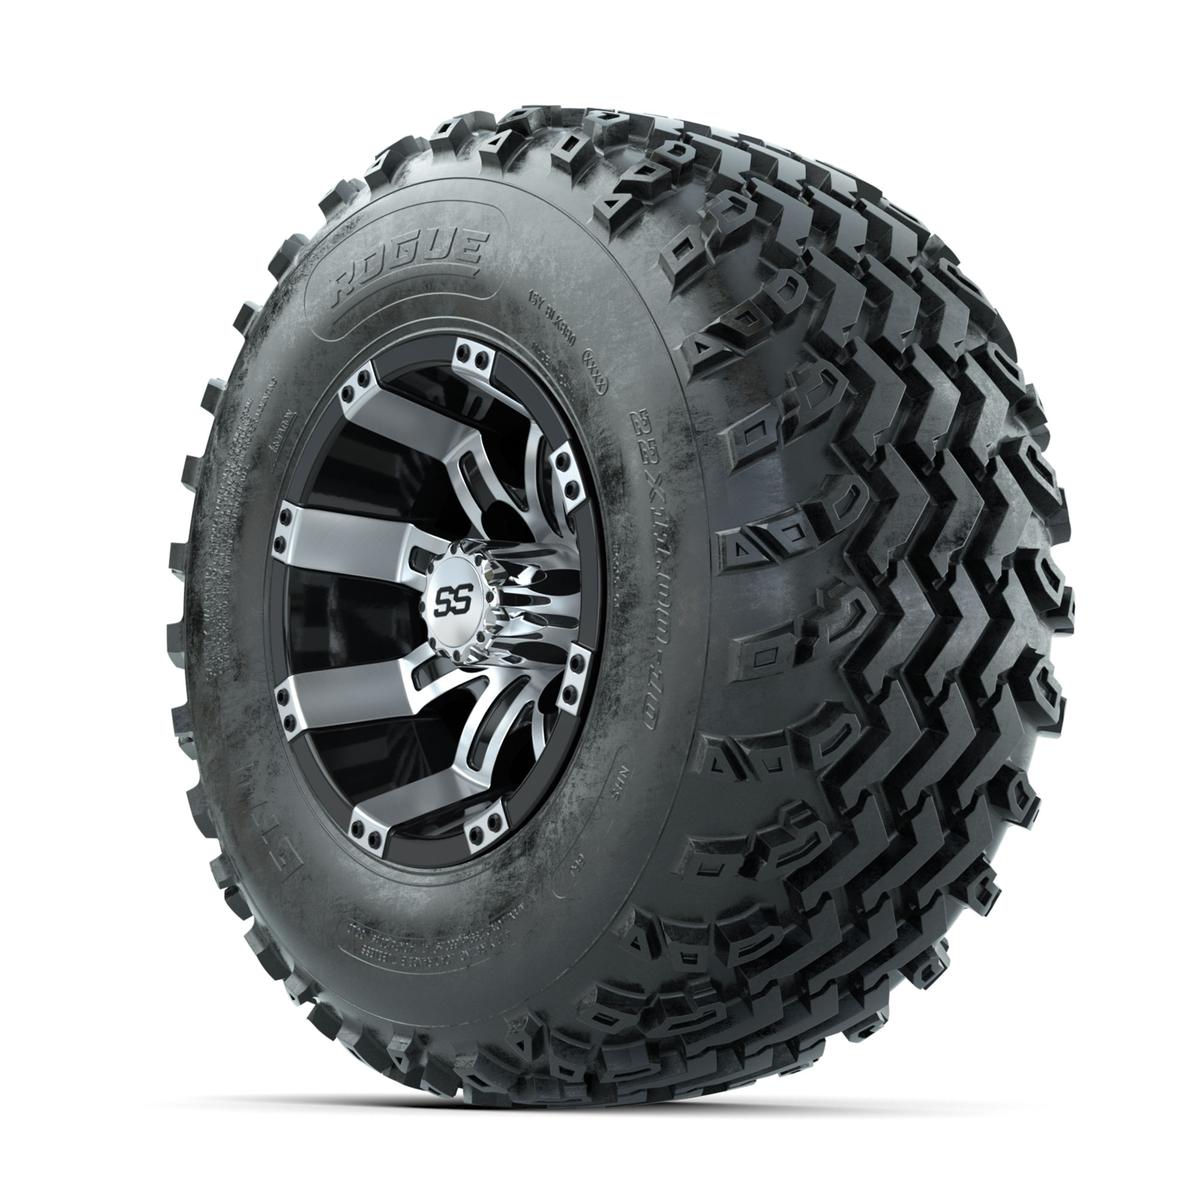 GTW Tempest Machined/Black 10 in Wheels with 22x11.00-10 Rogue All Terrain Tires – Full Set